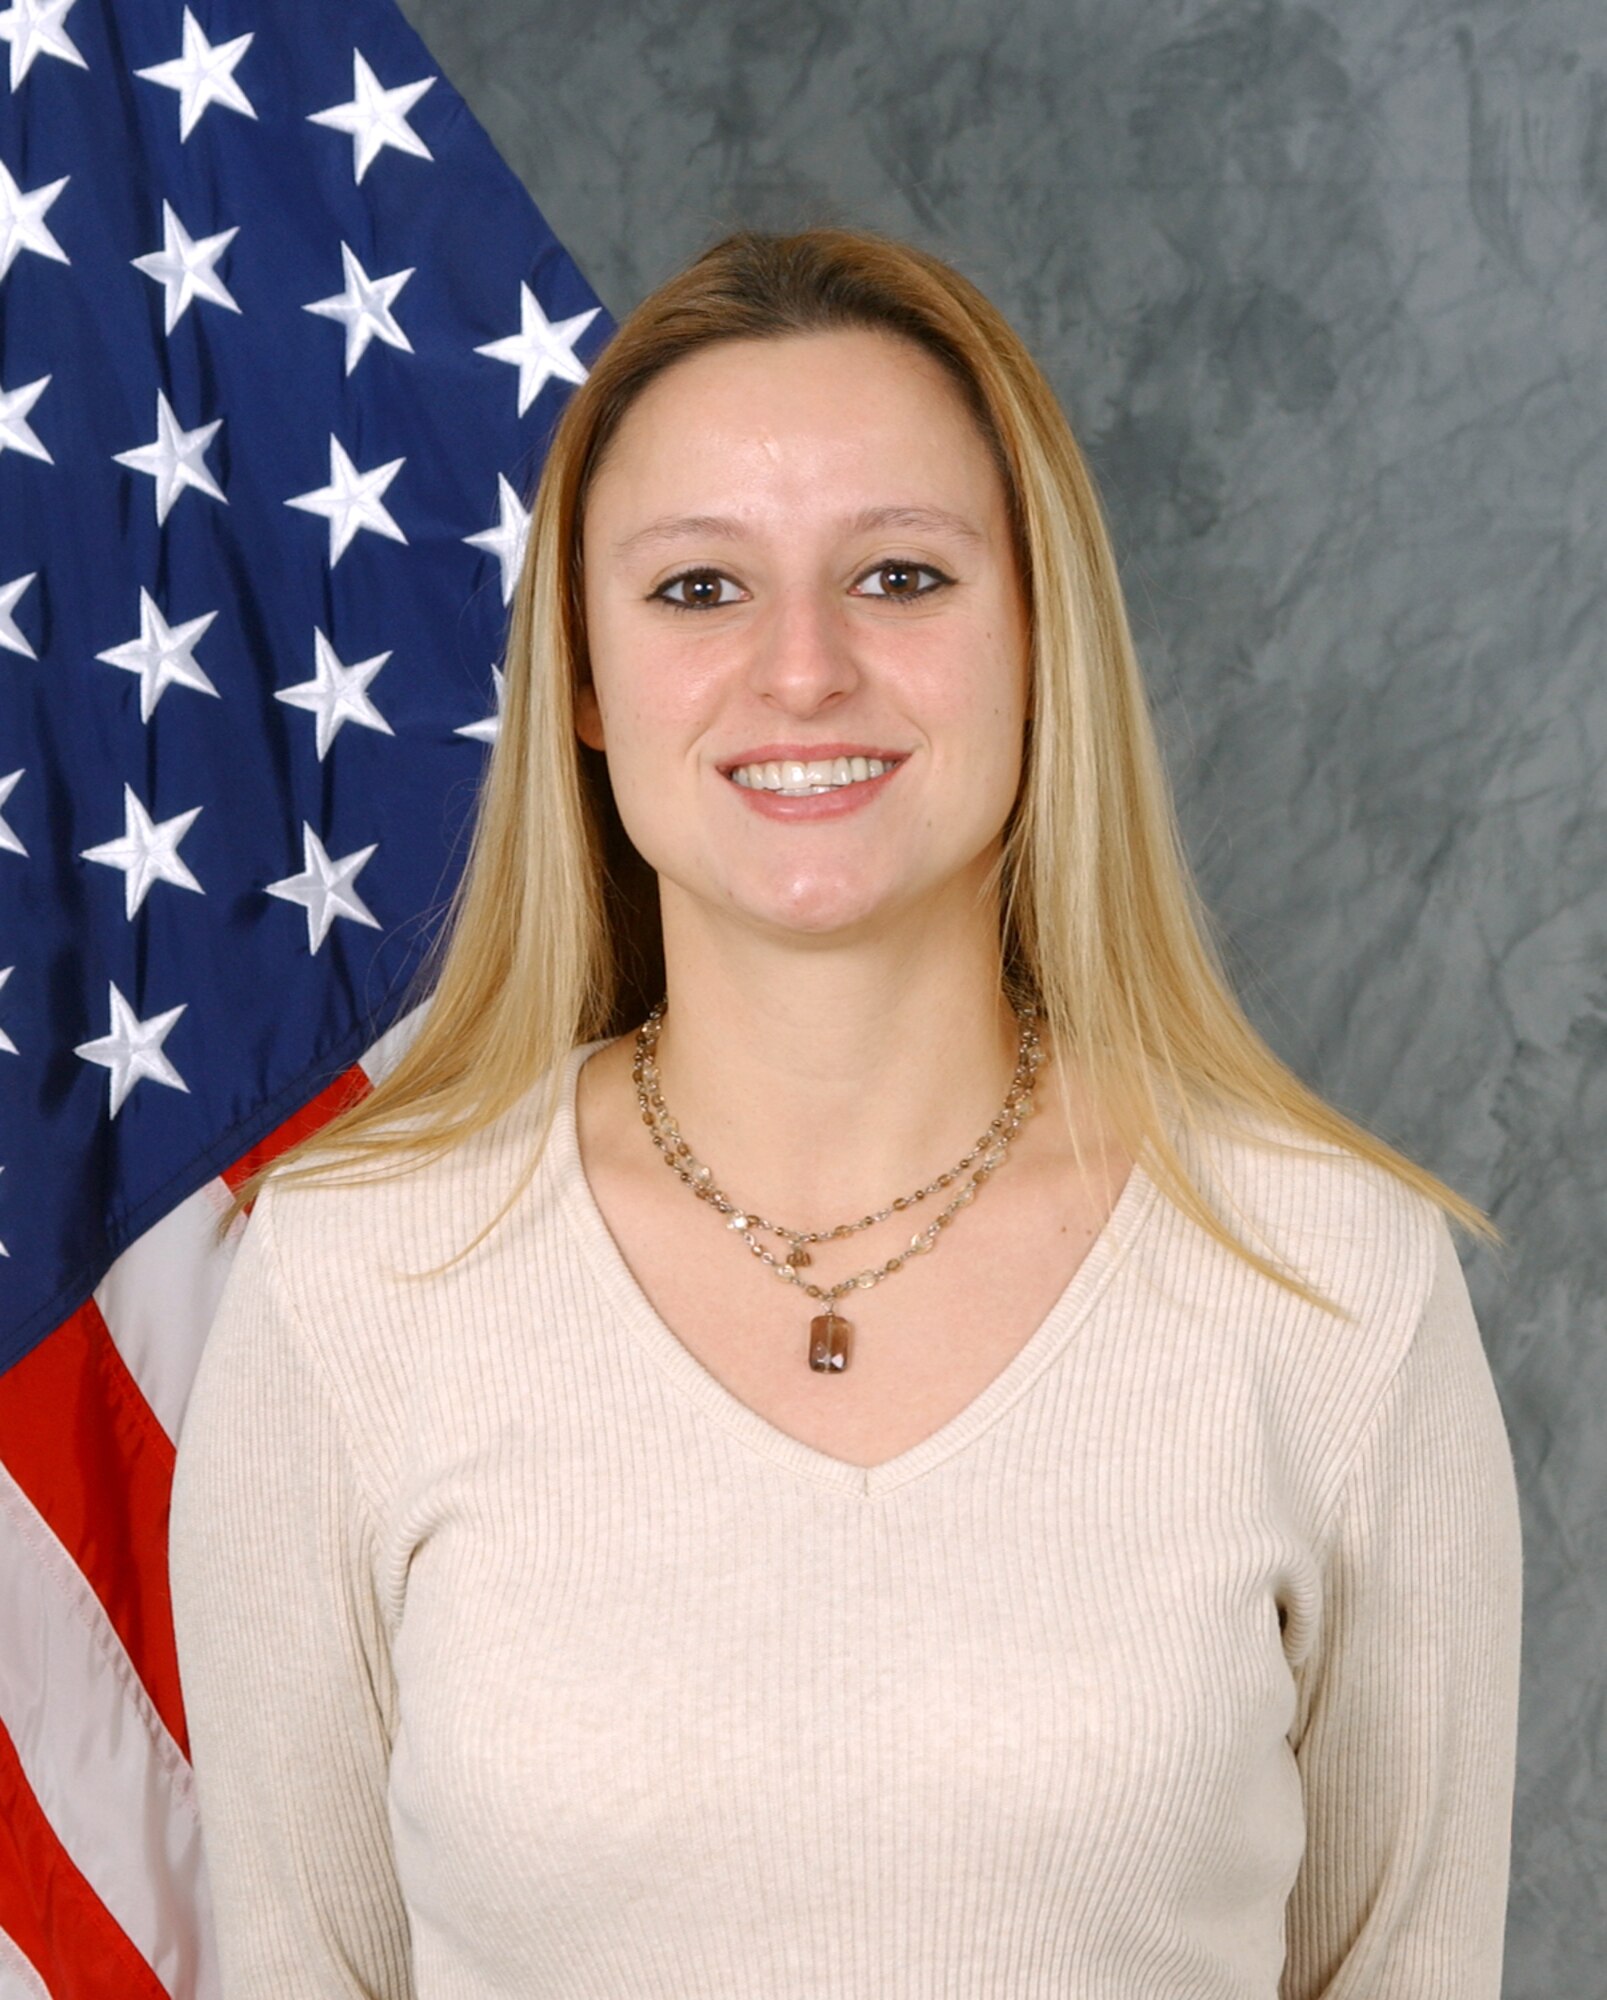 Ms. Jennifer Turkington, 7th Space Warning Squadron, 21st Operations Group, earned countless recognitions, including being named as a 21st Space Wing Air Force Association Civilian of the Year nominee. Her amazing drive, dedication to mission accomplishment and expert organizational skills were key to the superb impressions her unit made to 46 NATO distinguished visitors. Ms. Turkington’s commitment to the base and her community are equally impressive. She led and participated in 29 booster club fund raisers and ran three 5K races to raise $30,000 in support of leukemia patient and breast patient cancer awareness. (U.S. Air Force photo)